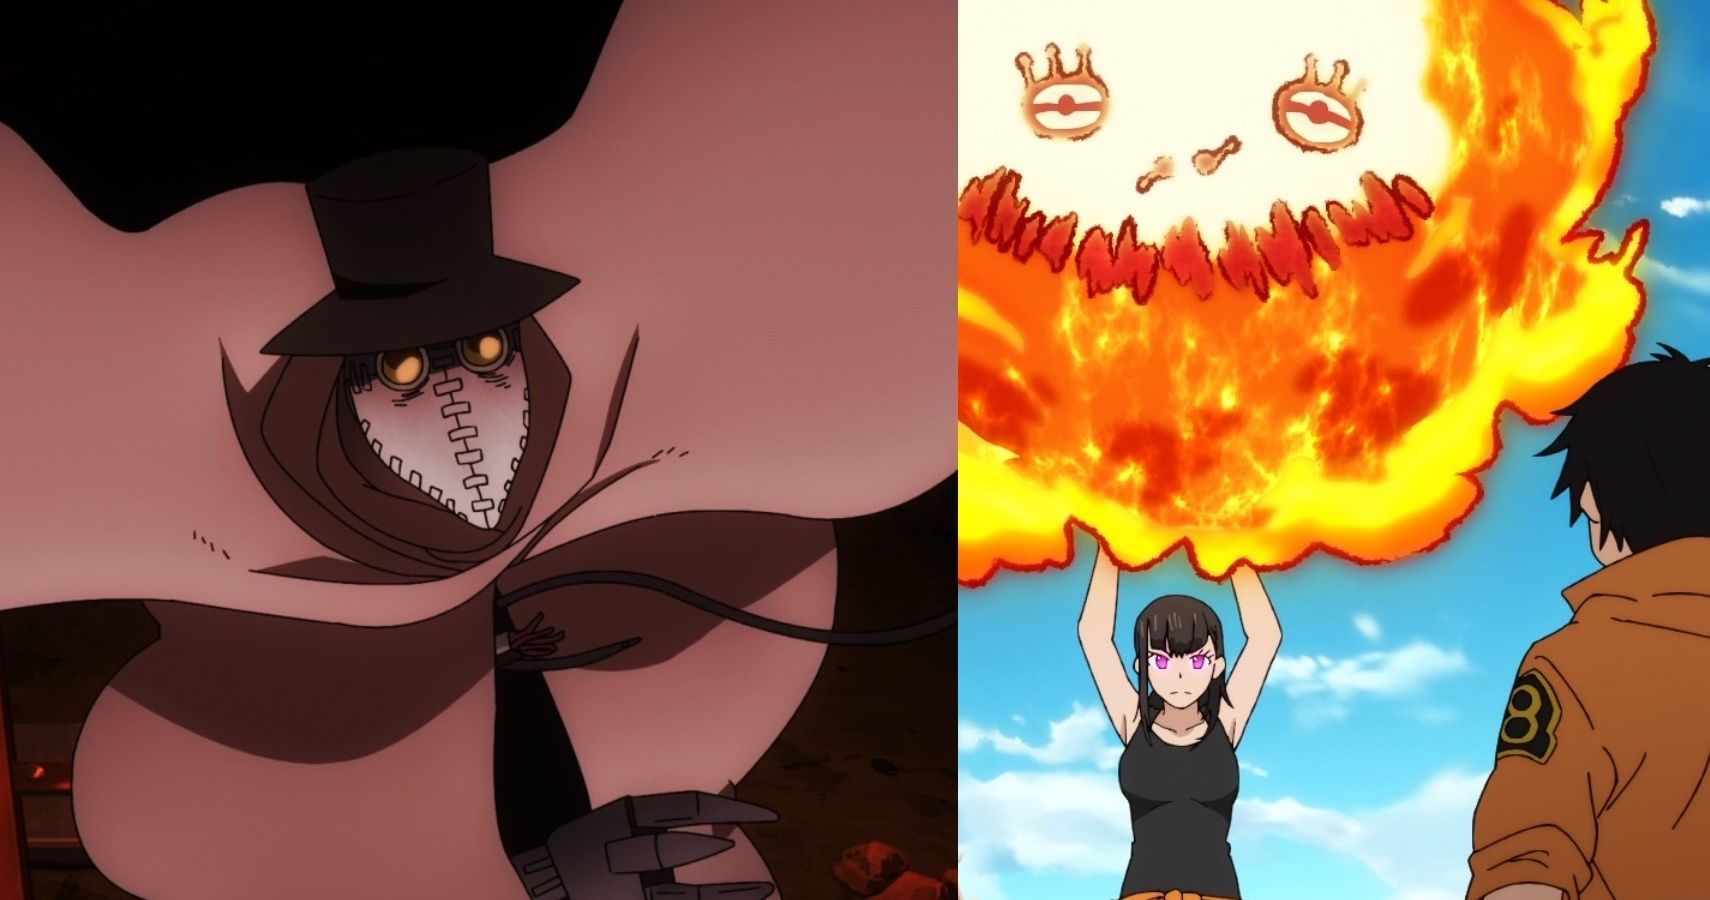 The Best Episode Of Fire Force Season 2 According To Fans